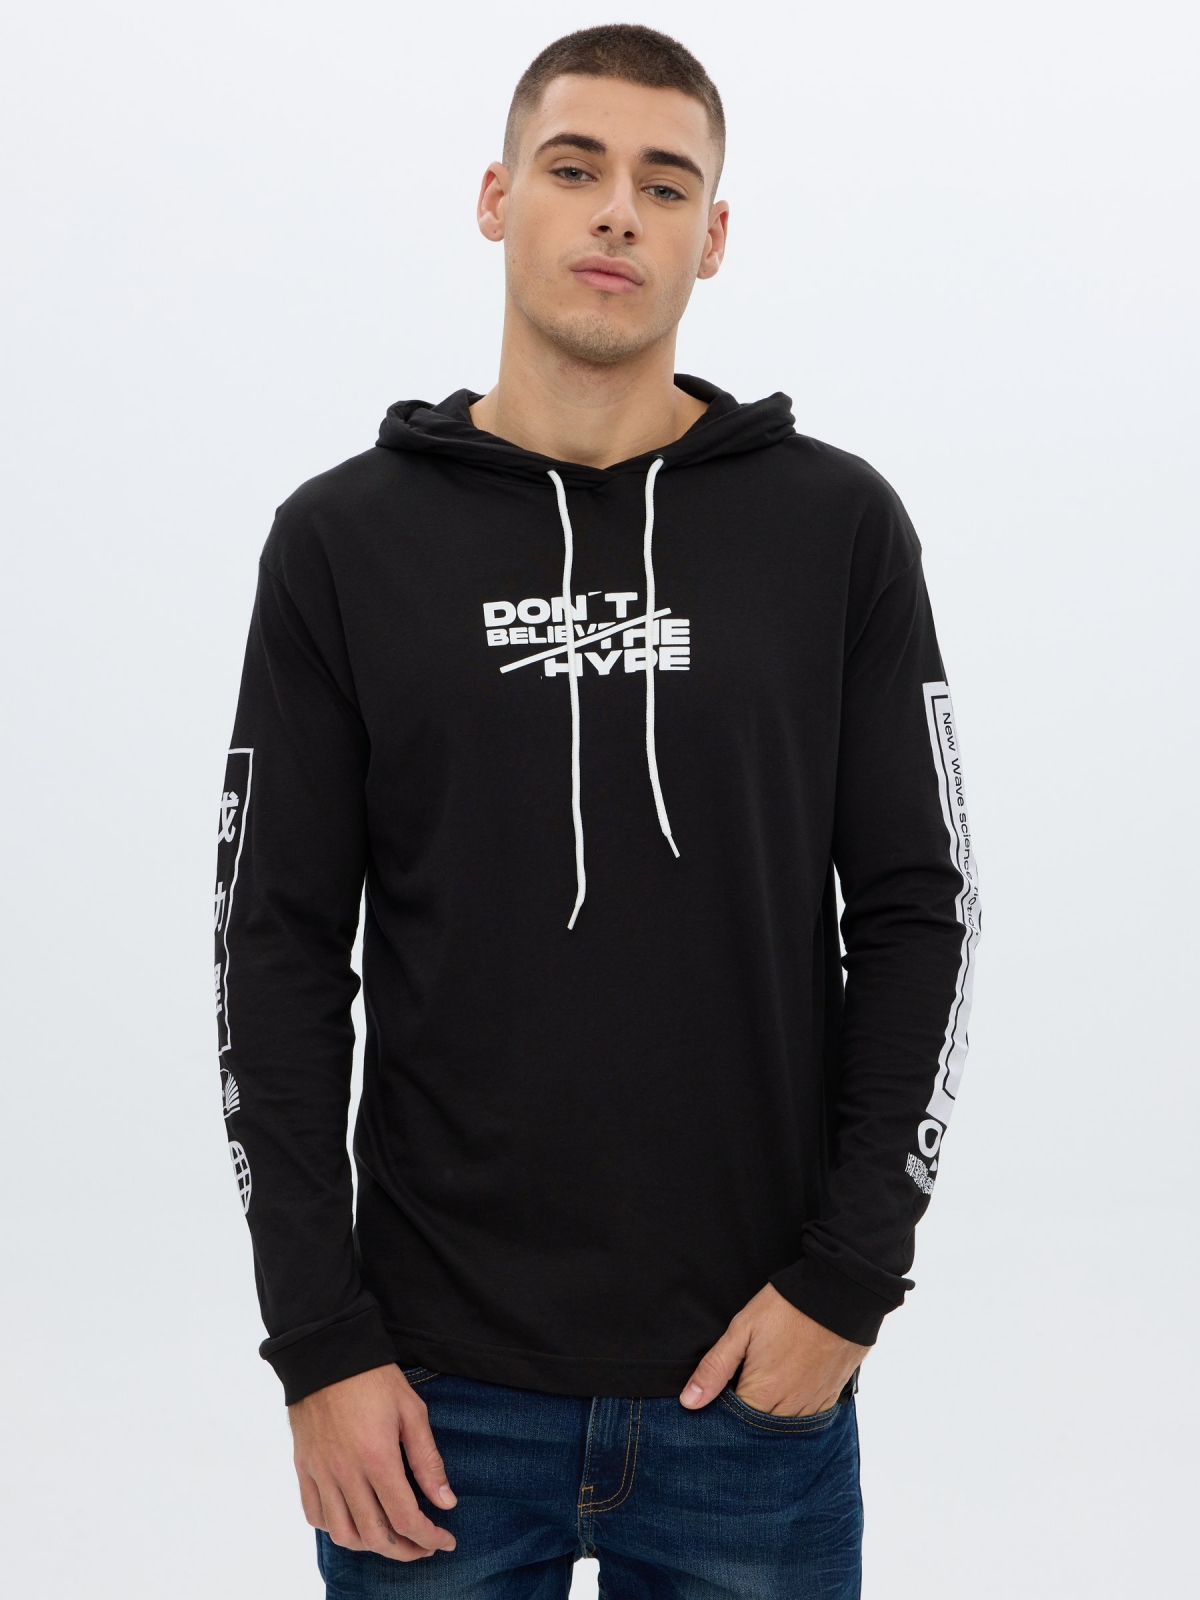 Printed hooded t-shirt black middle front view